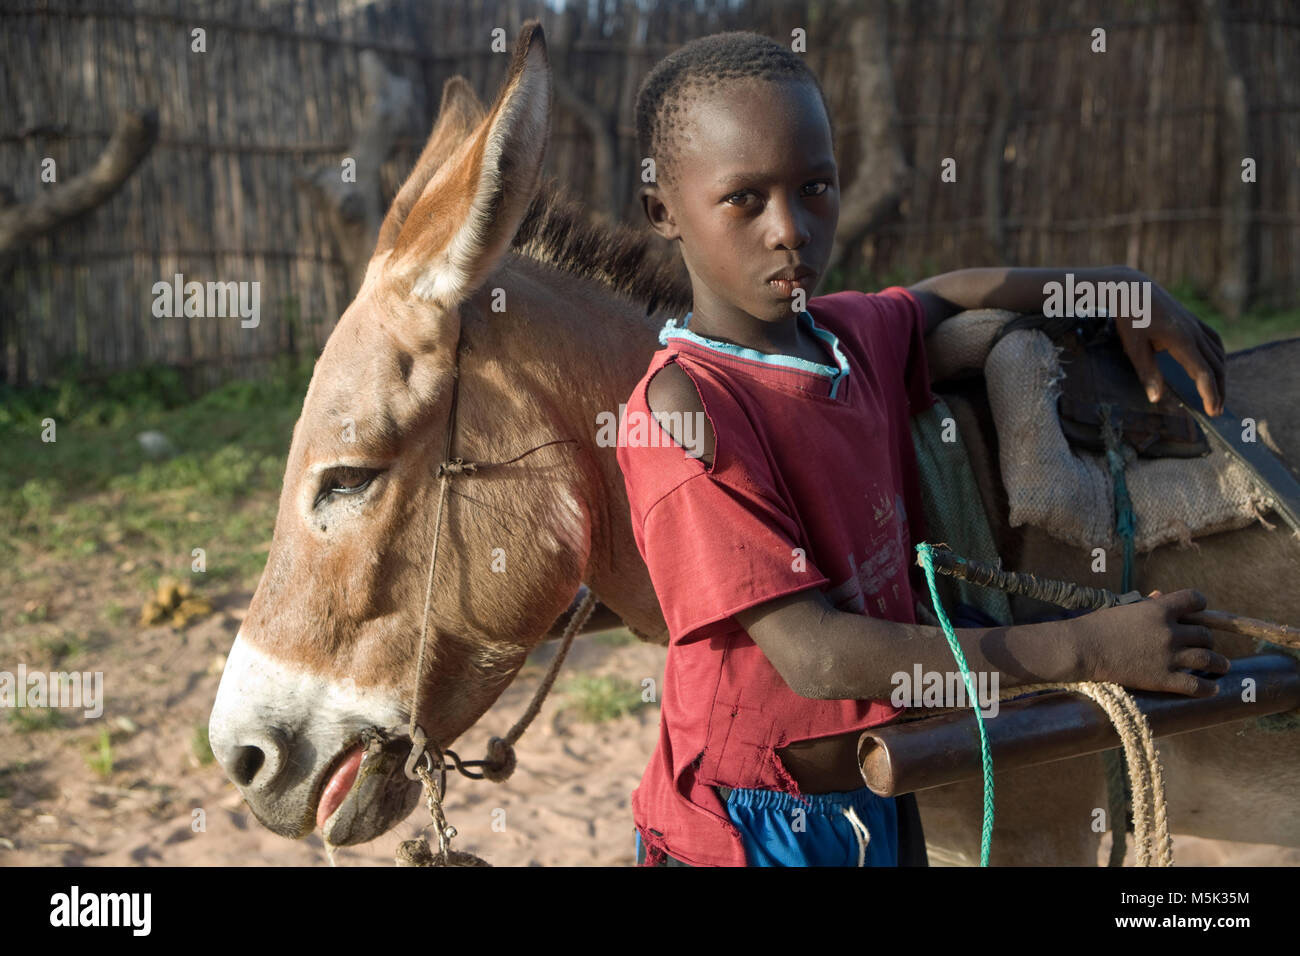 Senegalese boy poses with his donkey used for work Stock Photo